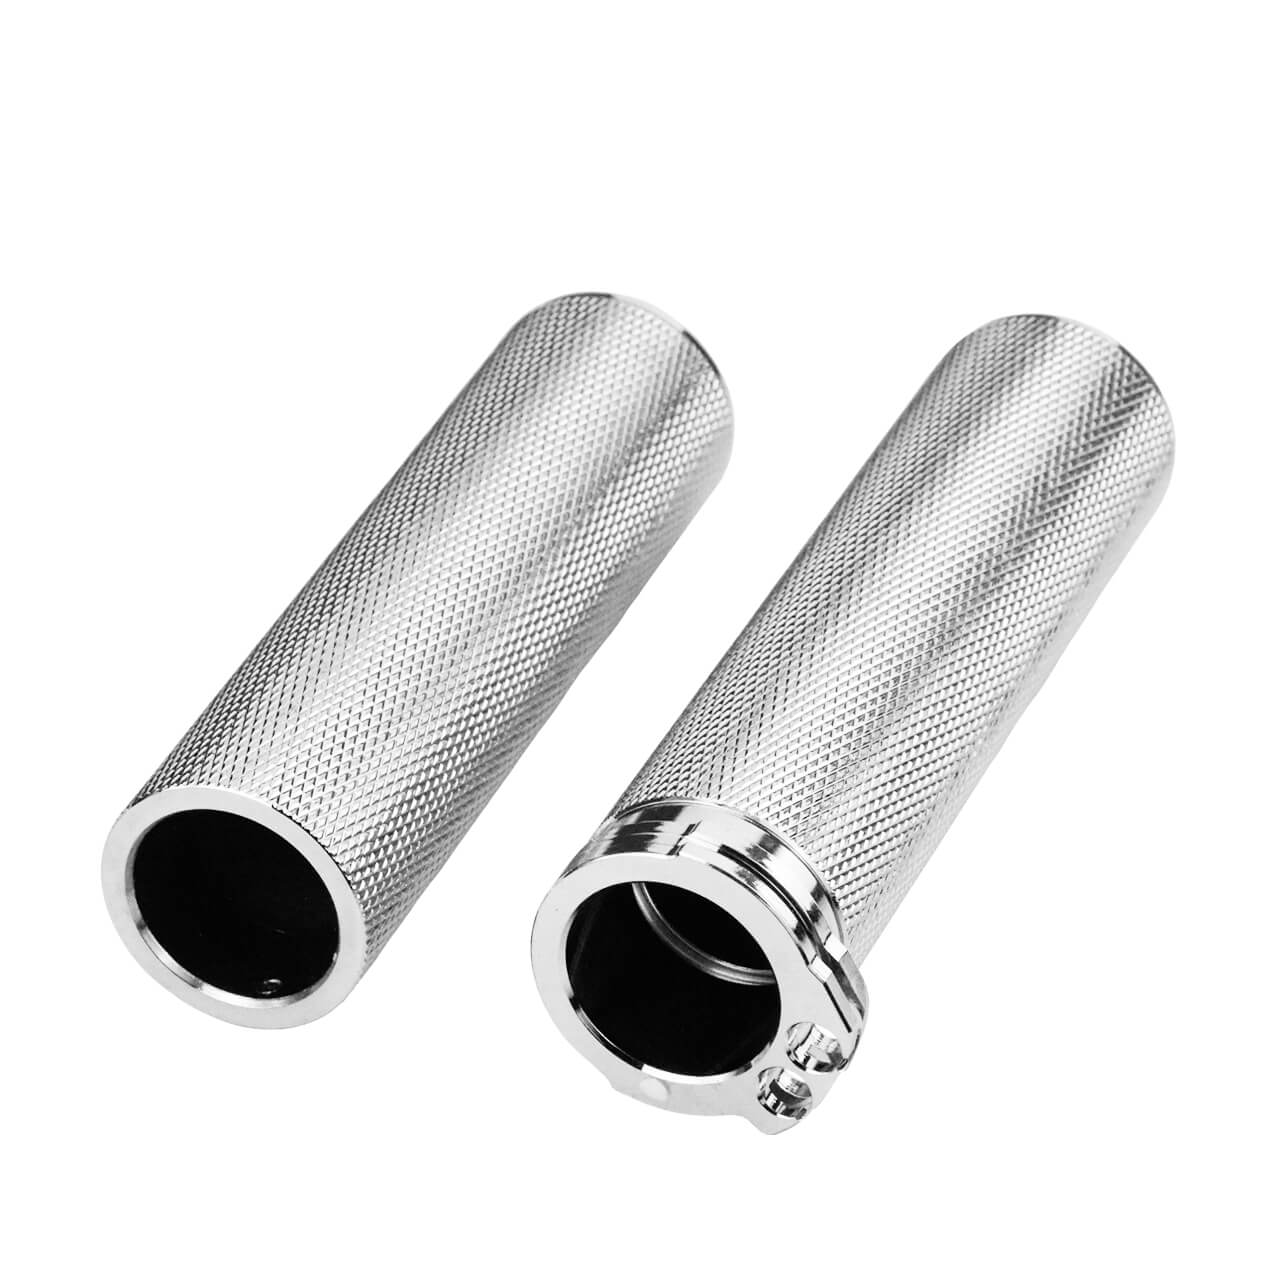 Mactions CNC chrome handle grips for harley sportster GP003302